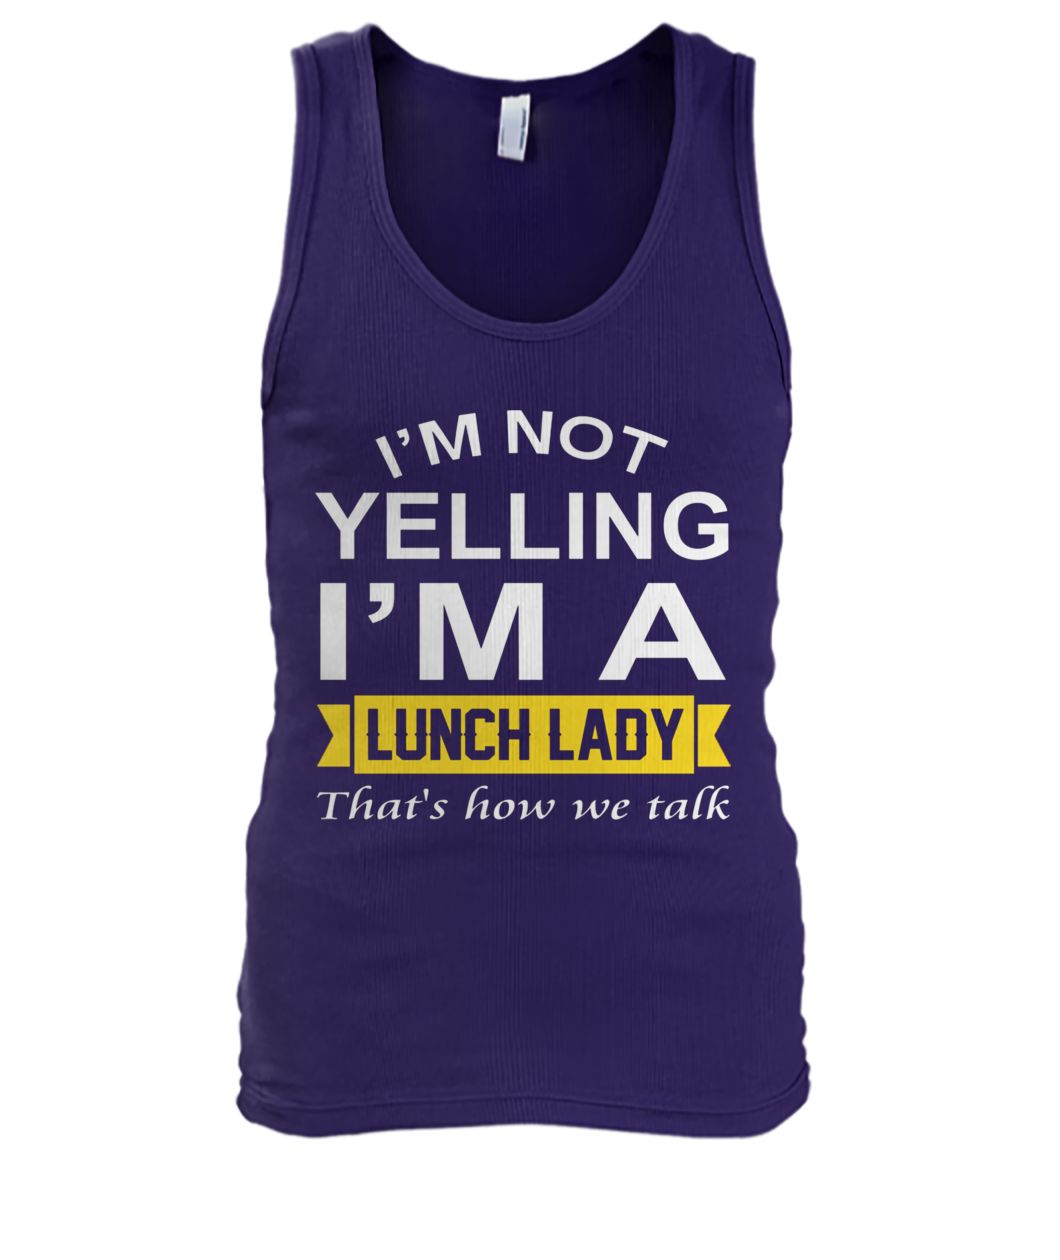 I'm not yelling I'm the lunch lady that's how we talk men's tank top